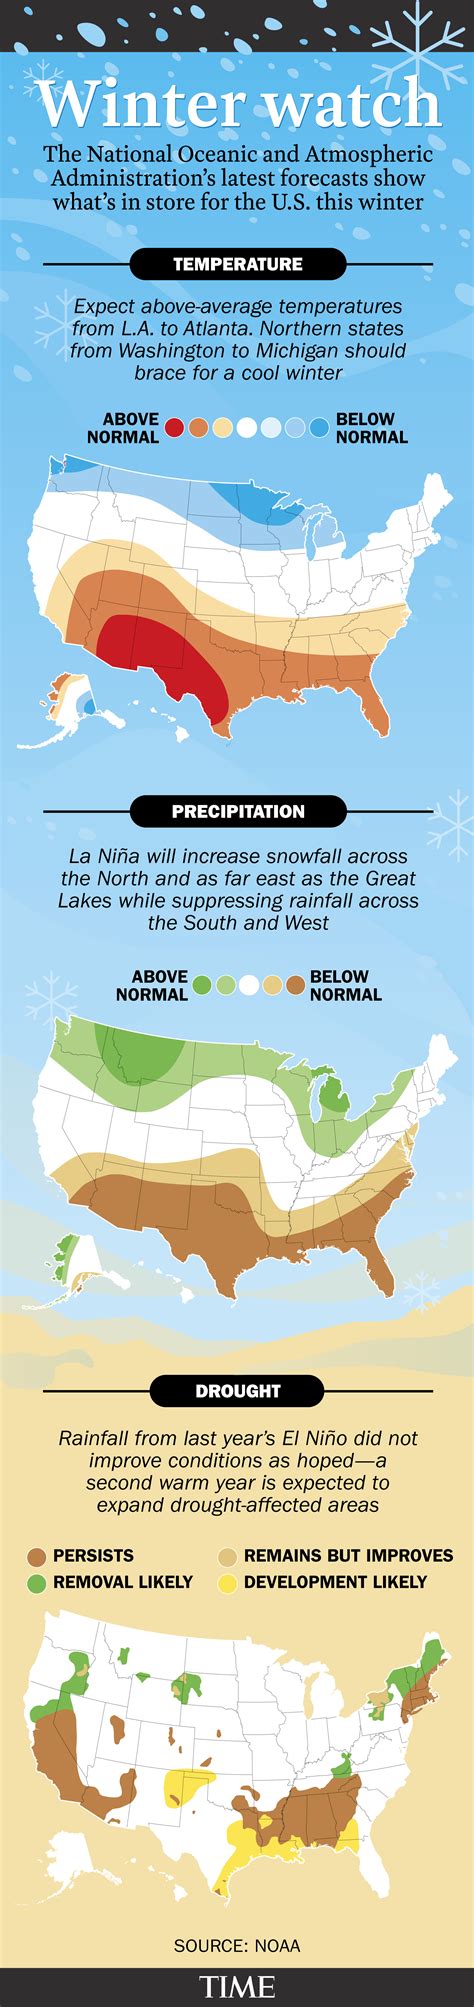 Winter Weather Forecast What To Expect For Winter 2016 2017 Time